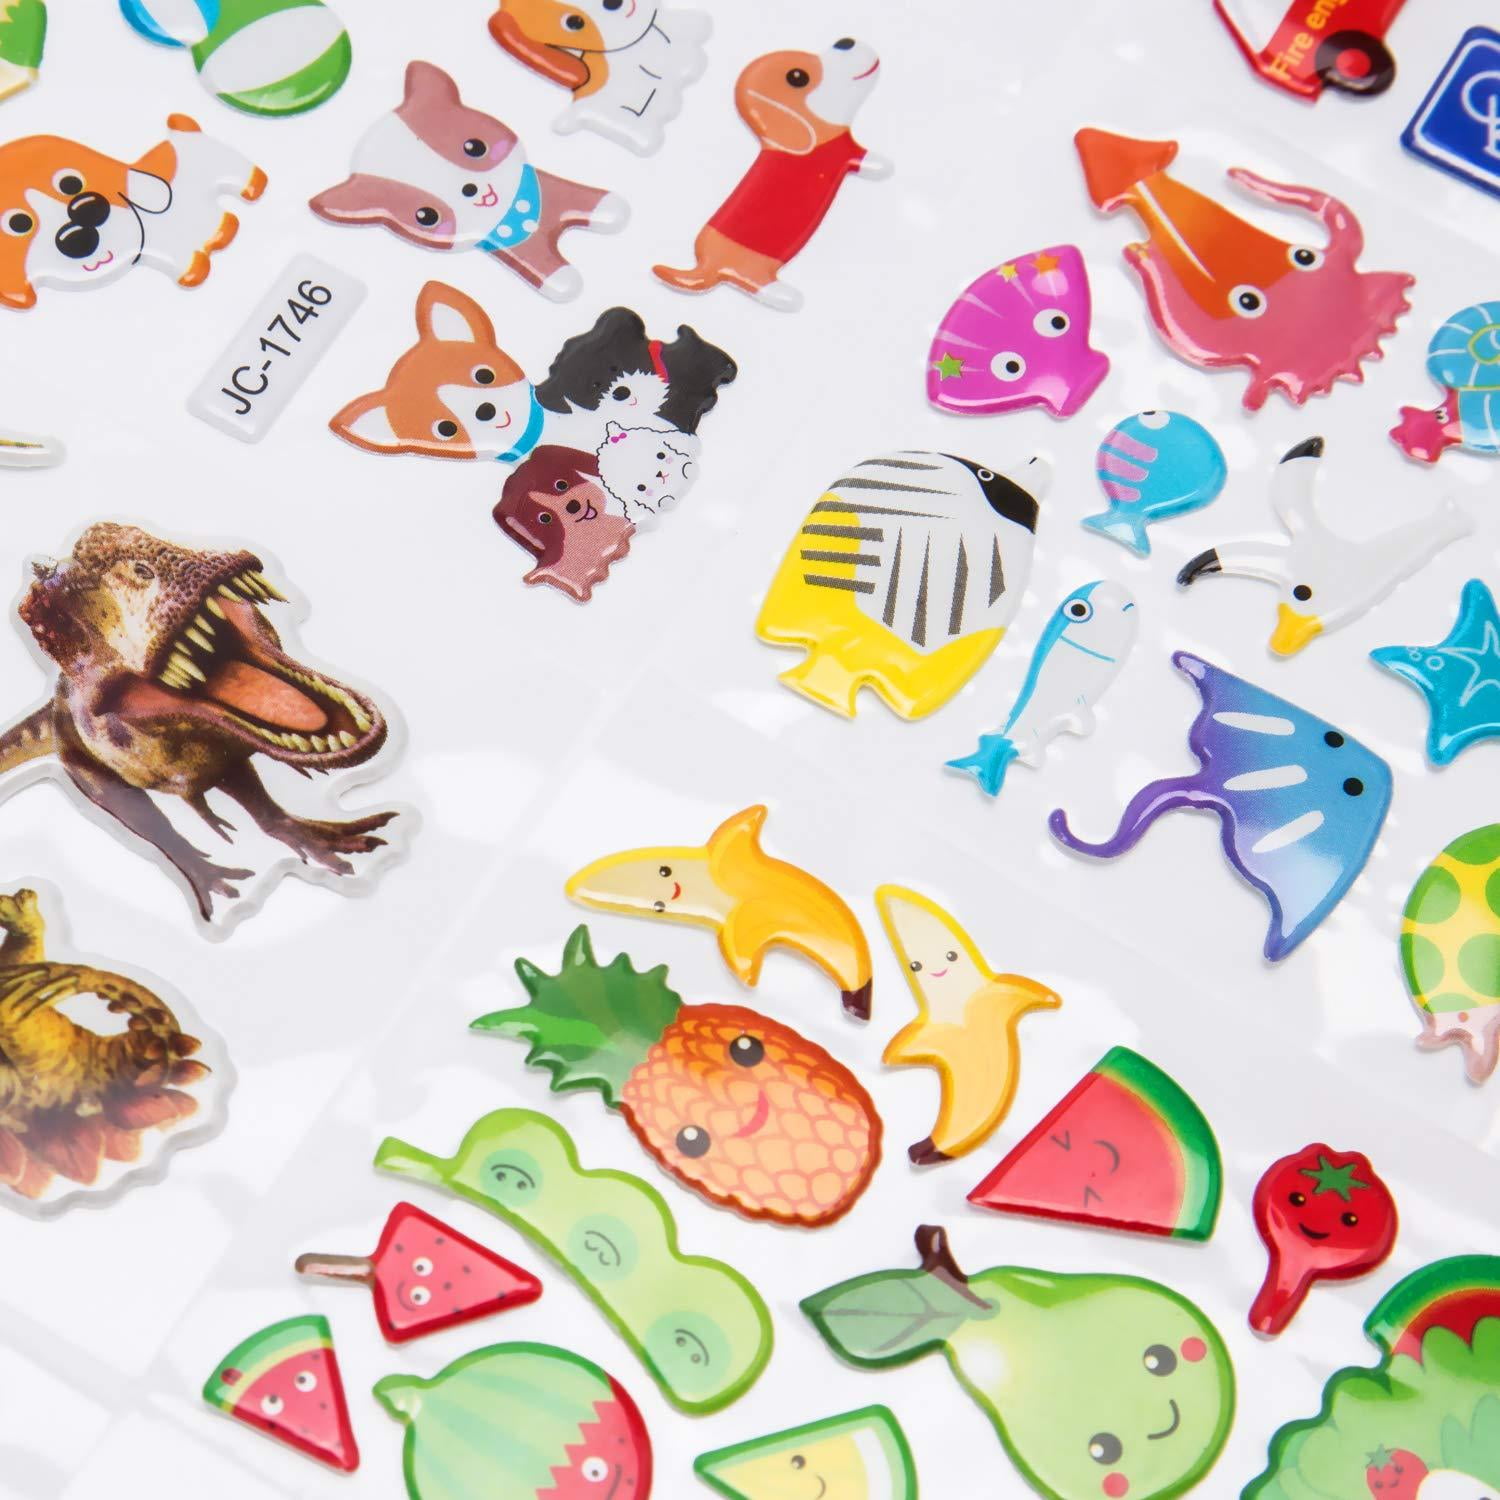 Fruit Cartoon Dinosaur Animal SAVITA 3D Stickers for Kids & Toddlers 900+ Puffy Stickers Variety Pack for Scrapbooking Bullet Journal Including Dinosaur Car Butterfly Fish Numbers ABC 